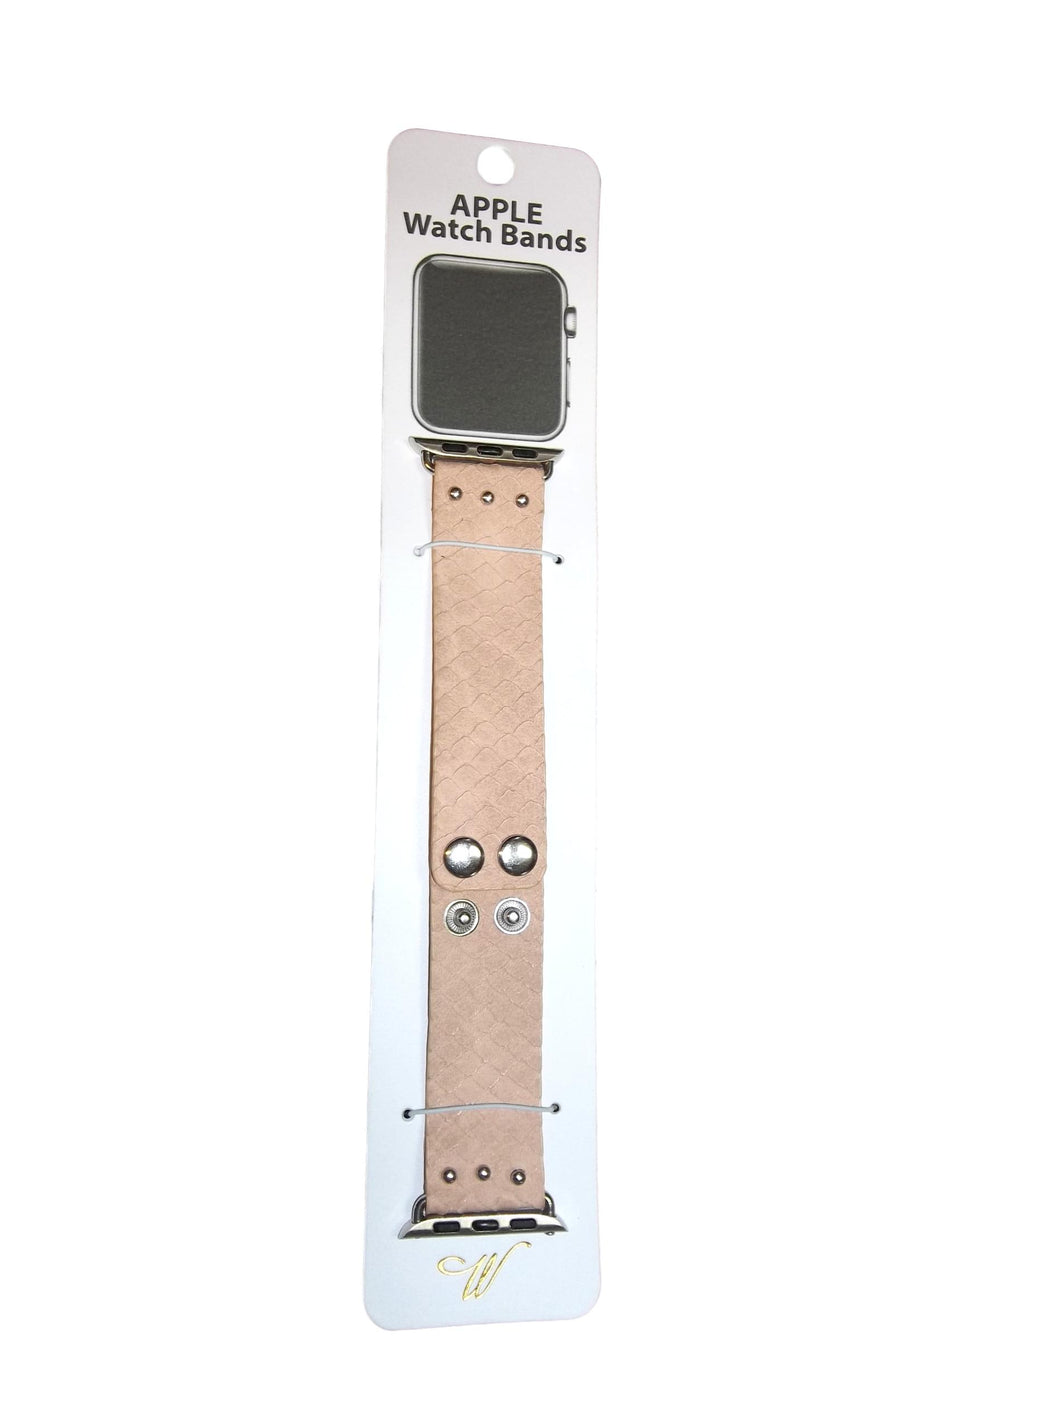 Scalloped Leather Apple Watch Bands